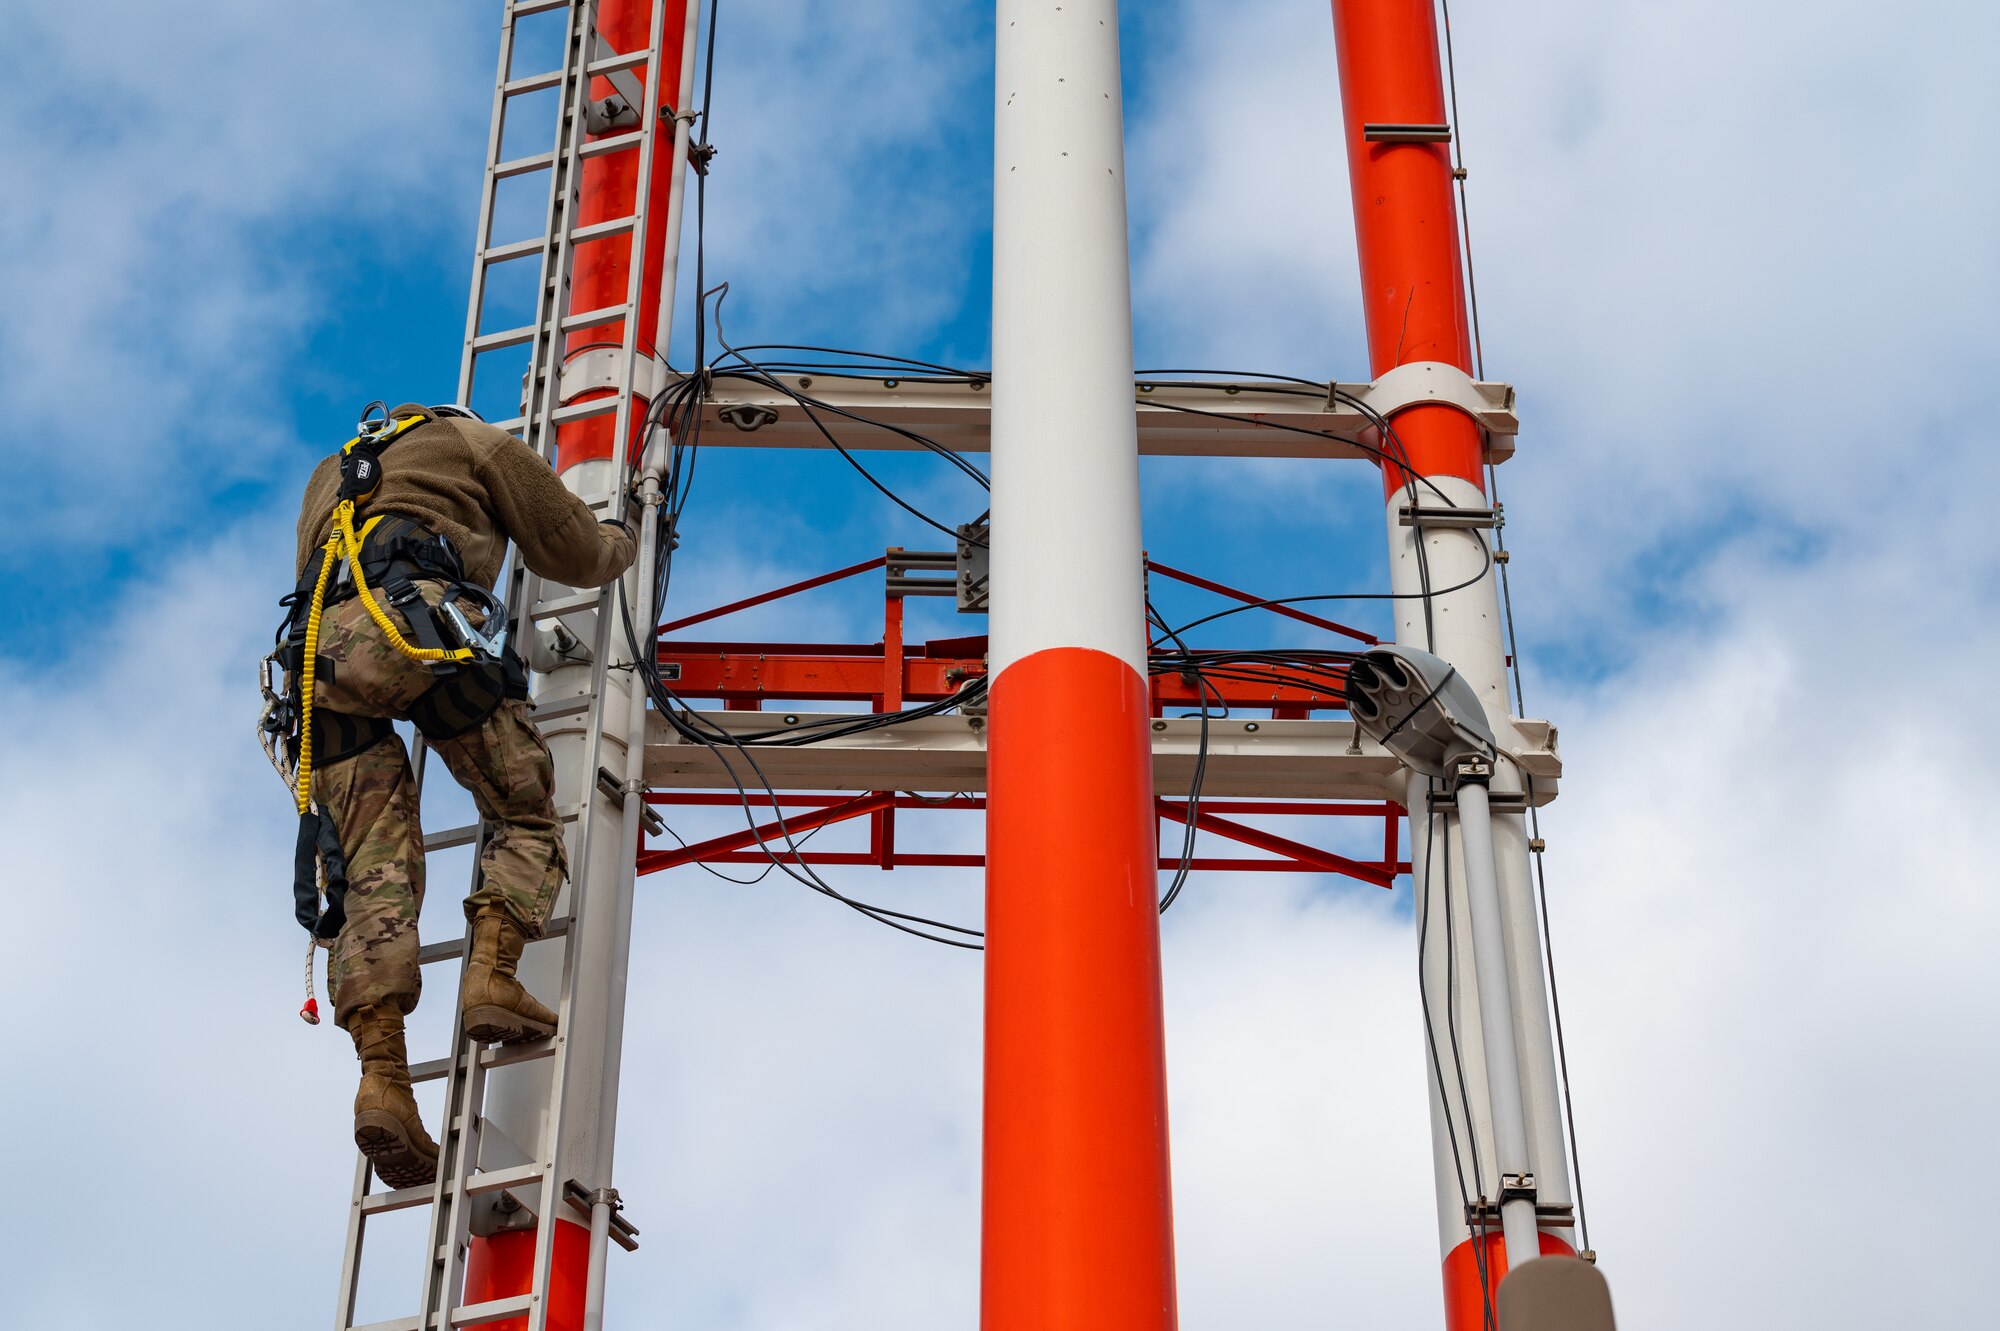 RAWS technicians inspect wire connections on glide slope antenna tower.